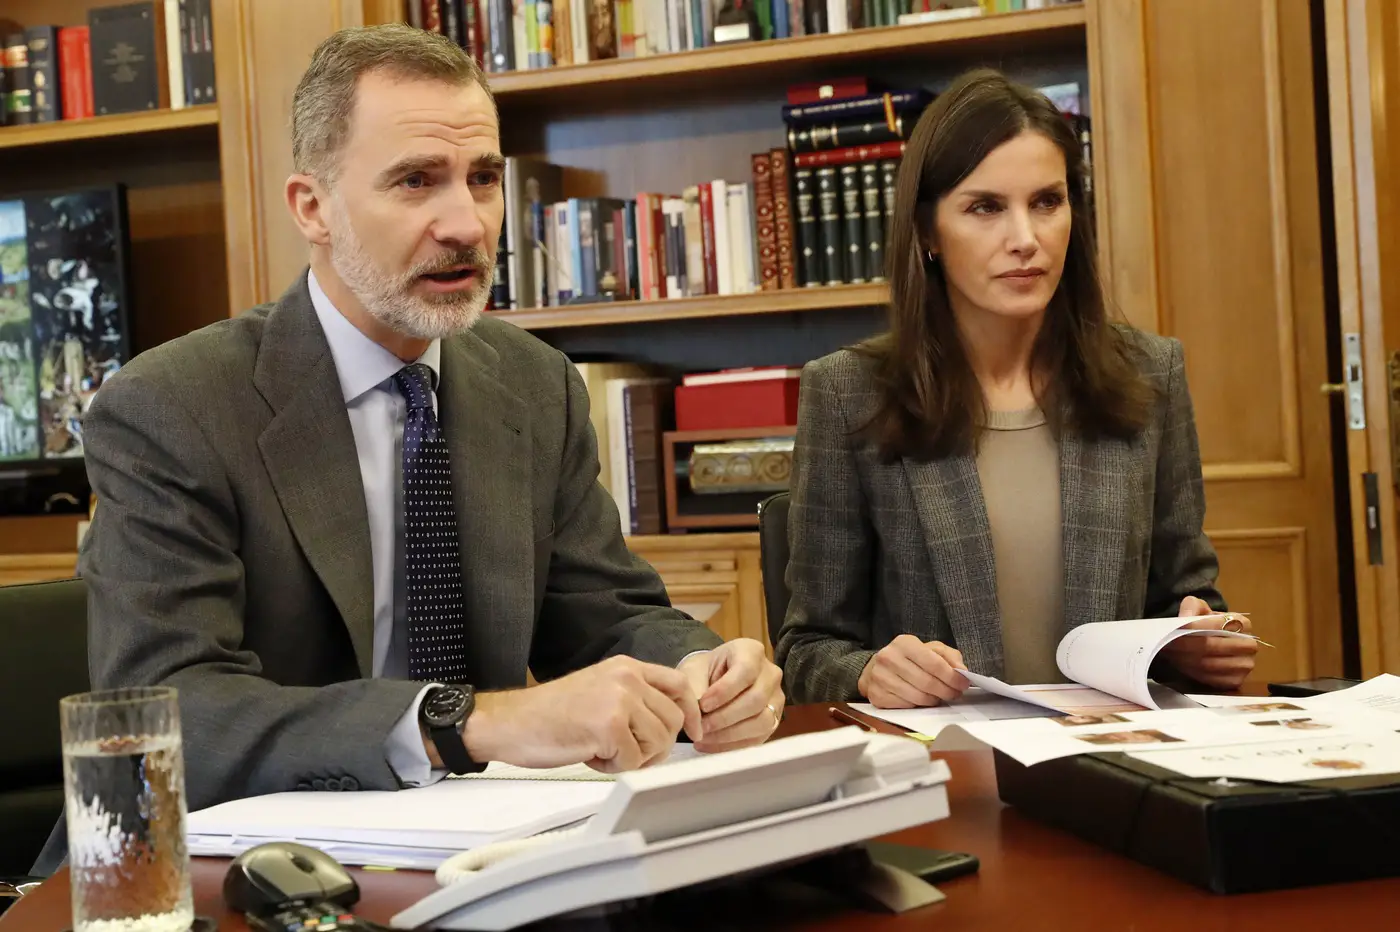 King Felipe and Queen Letizia support the joint initiative of the Royal Theater of Madrid and the Gran Teatre del Liceu in Barcelona